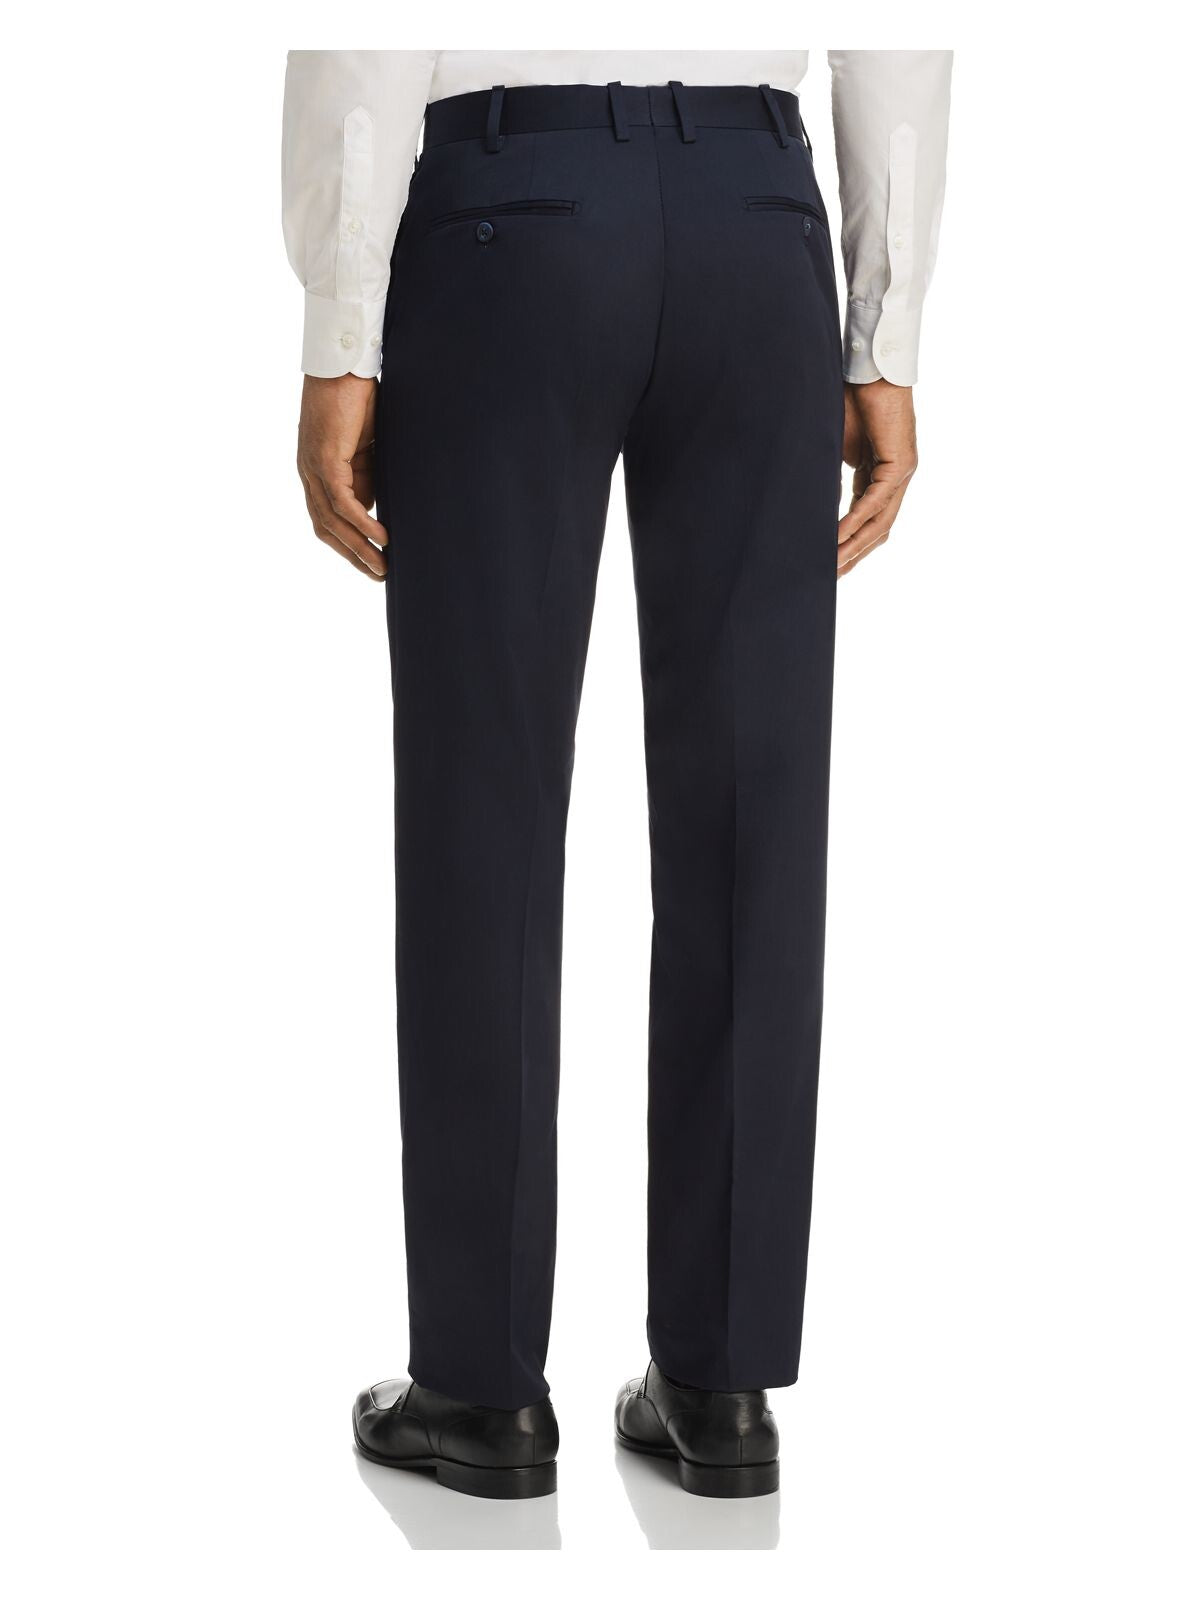 The Mens store Mens Navy Straight Leg, Stretch, Classic Fit Cotton Blend Pants 42R